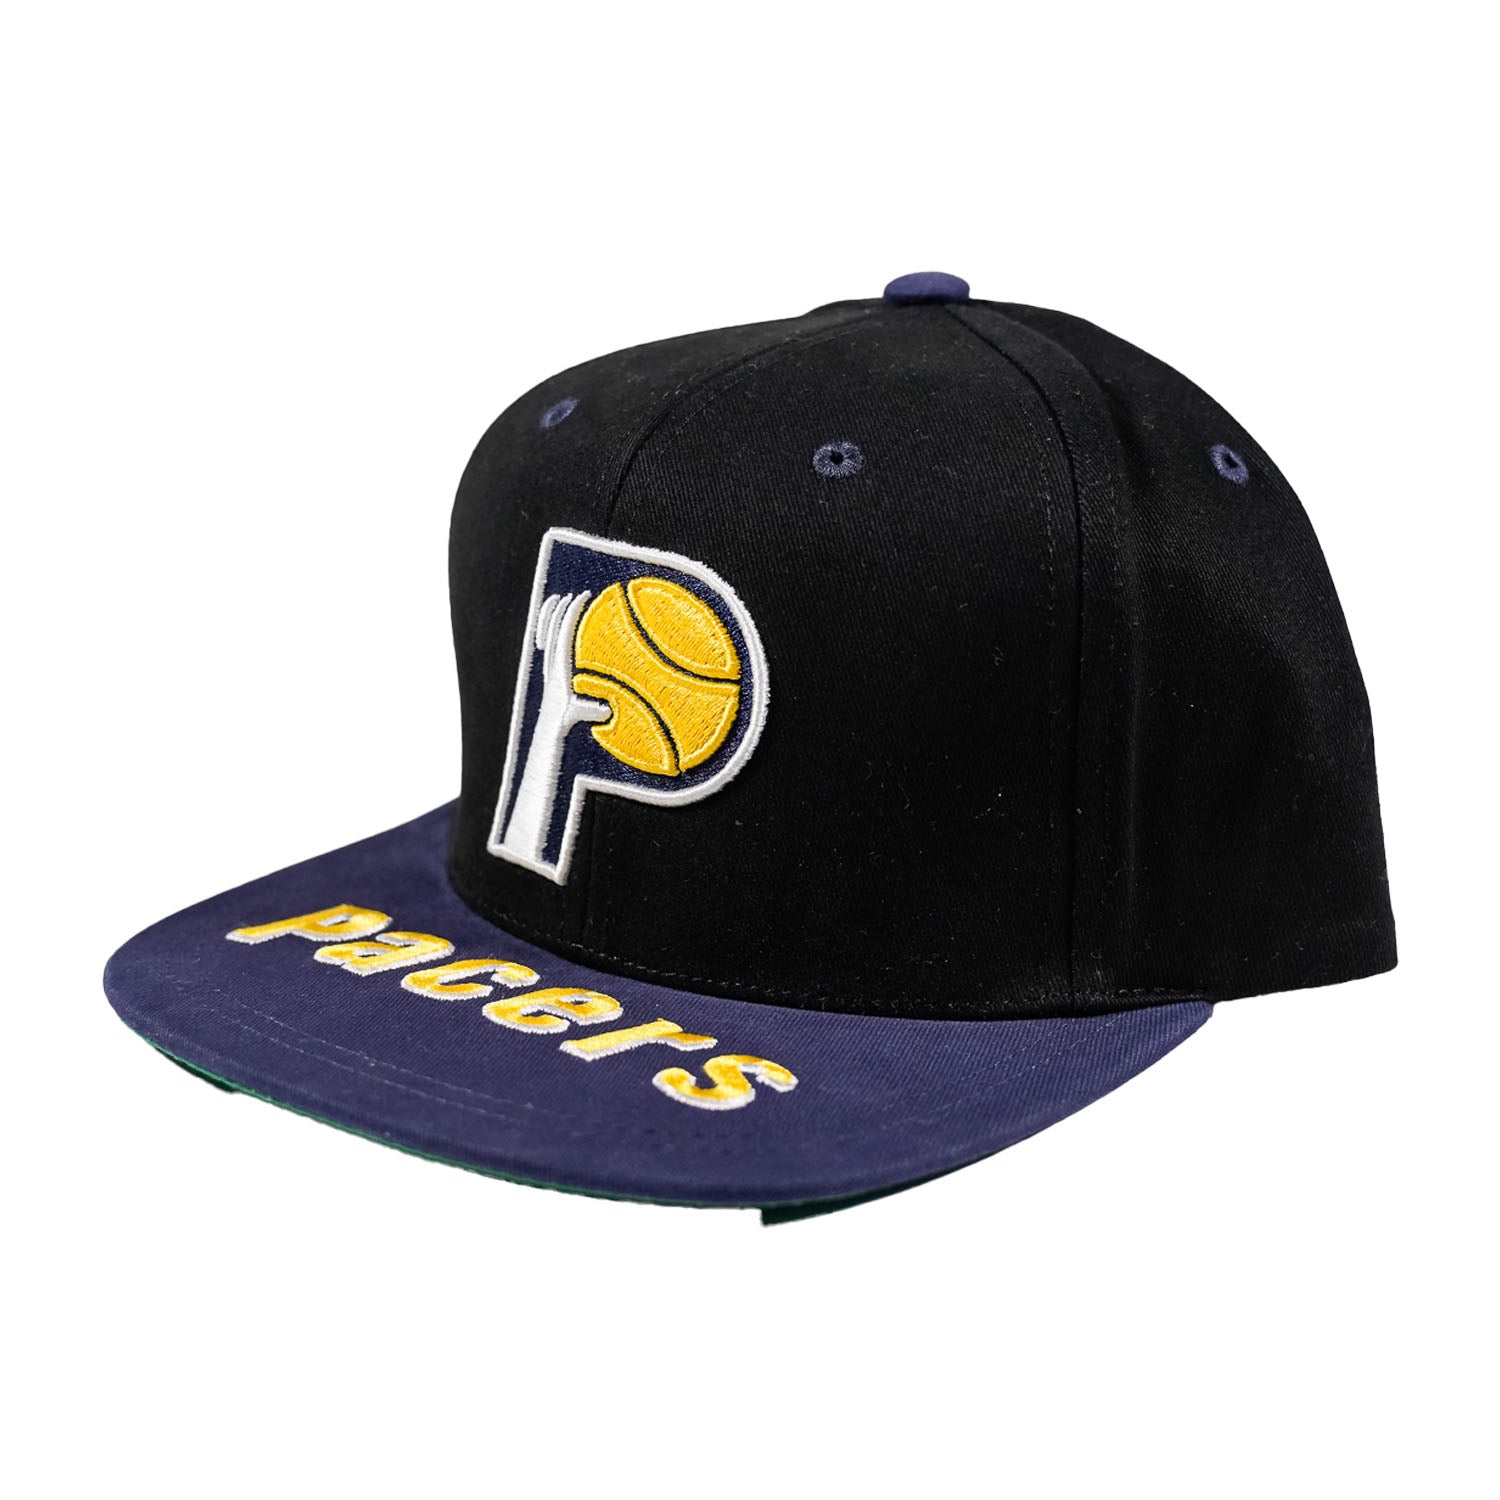 Pacers Team Store